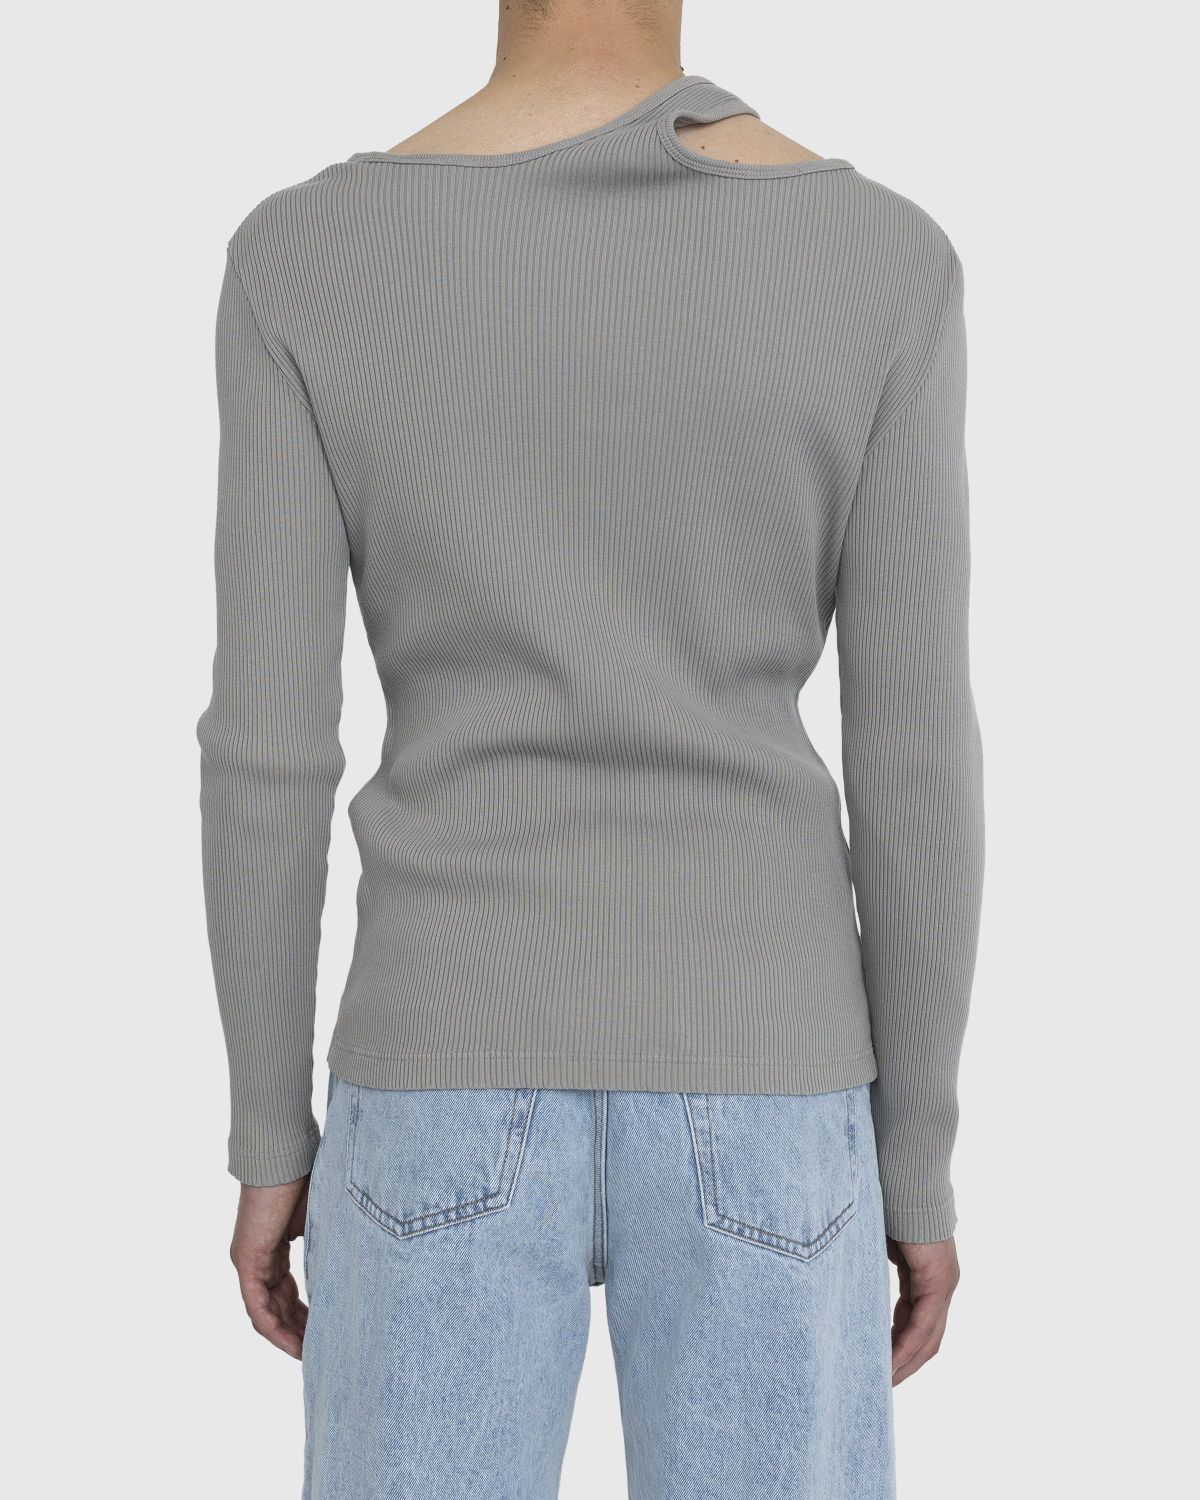 Y/Project – Classic Double Collar T-Shirt Taupe - Tops - Grey - Image 4